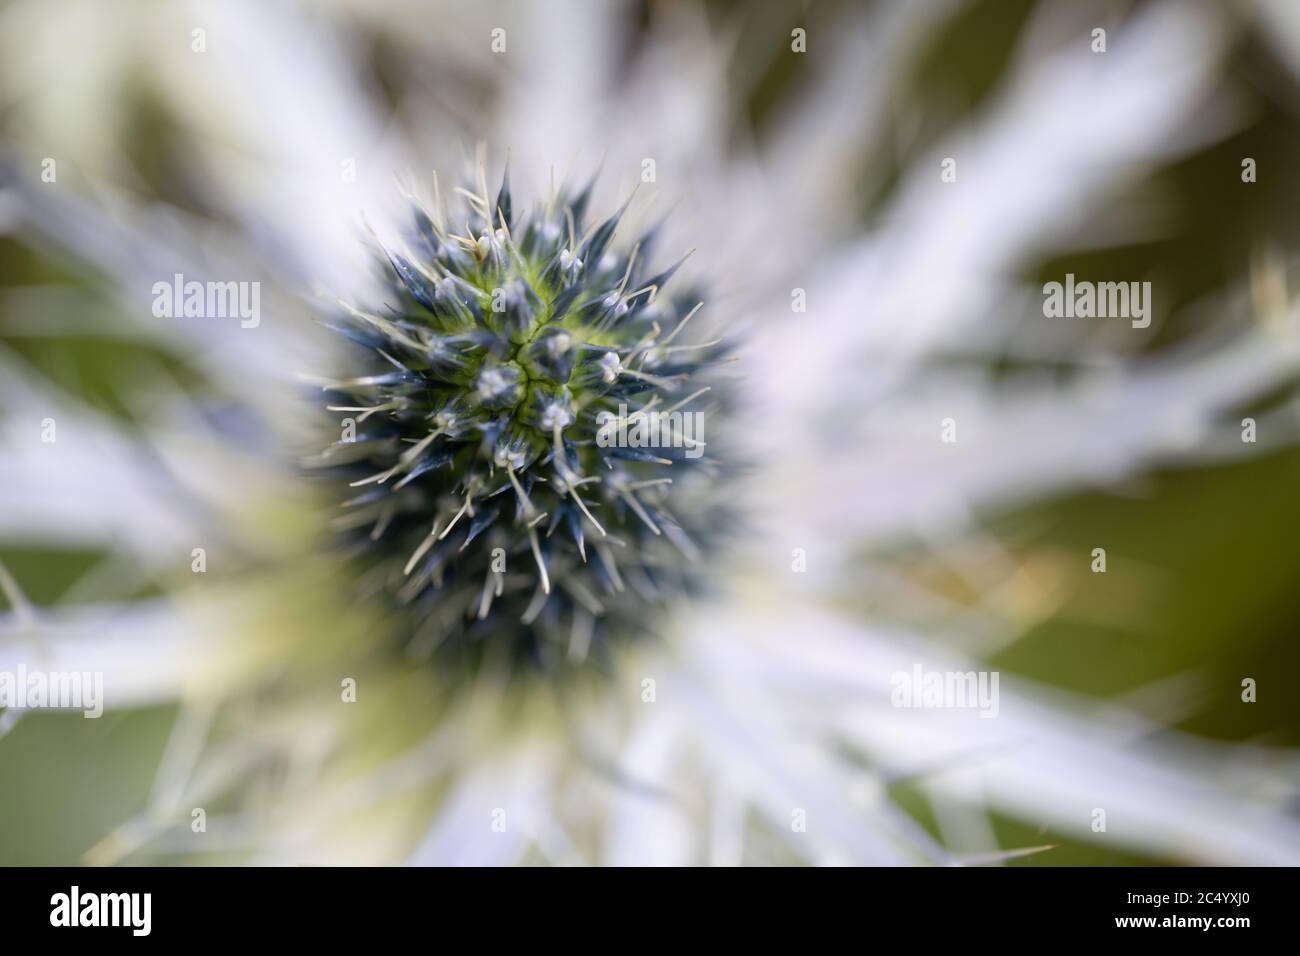 An ornamental cultivated garden thistle, UK Stock Photo